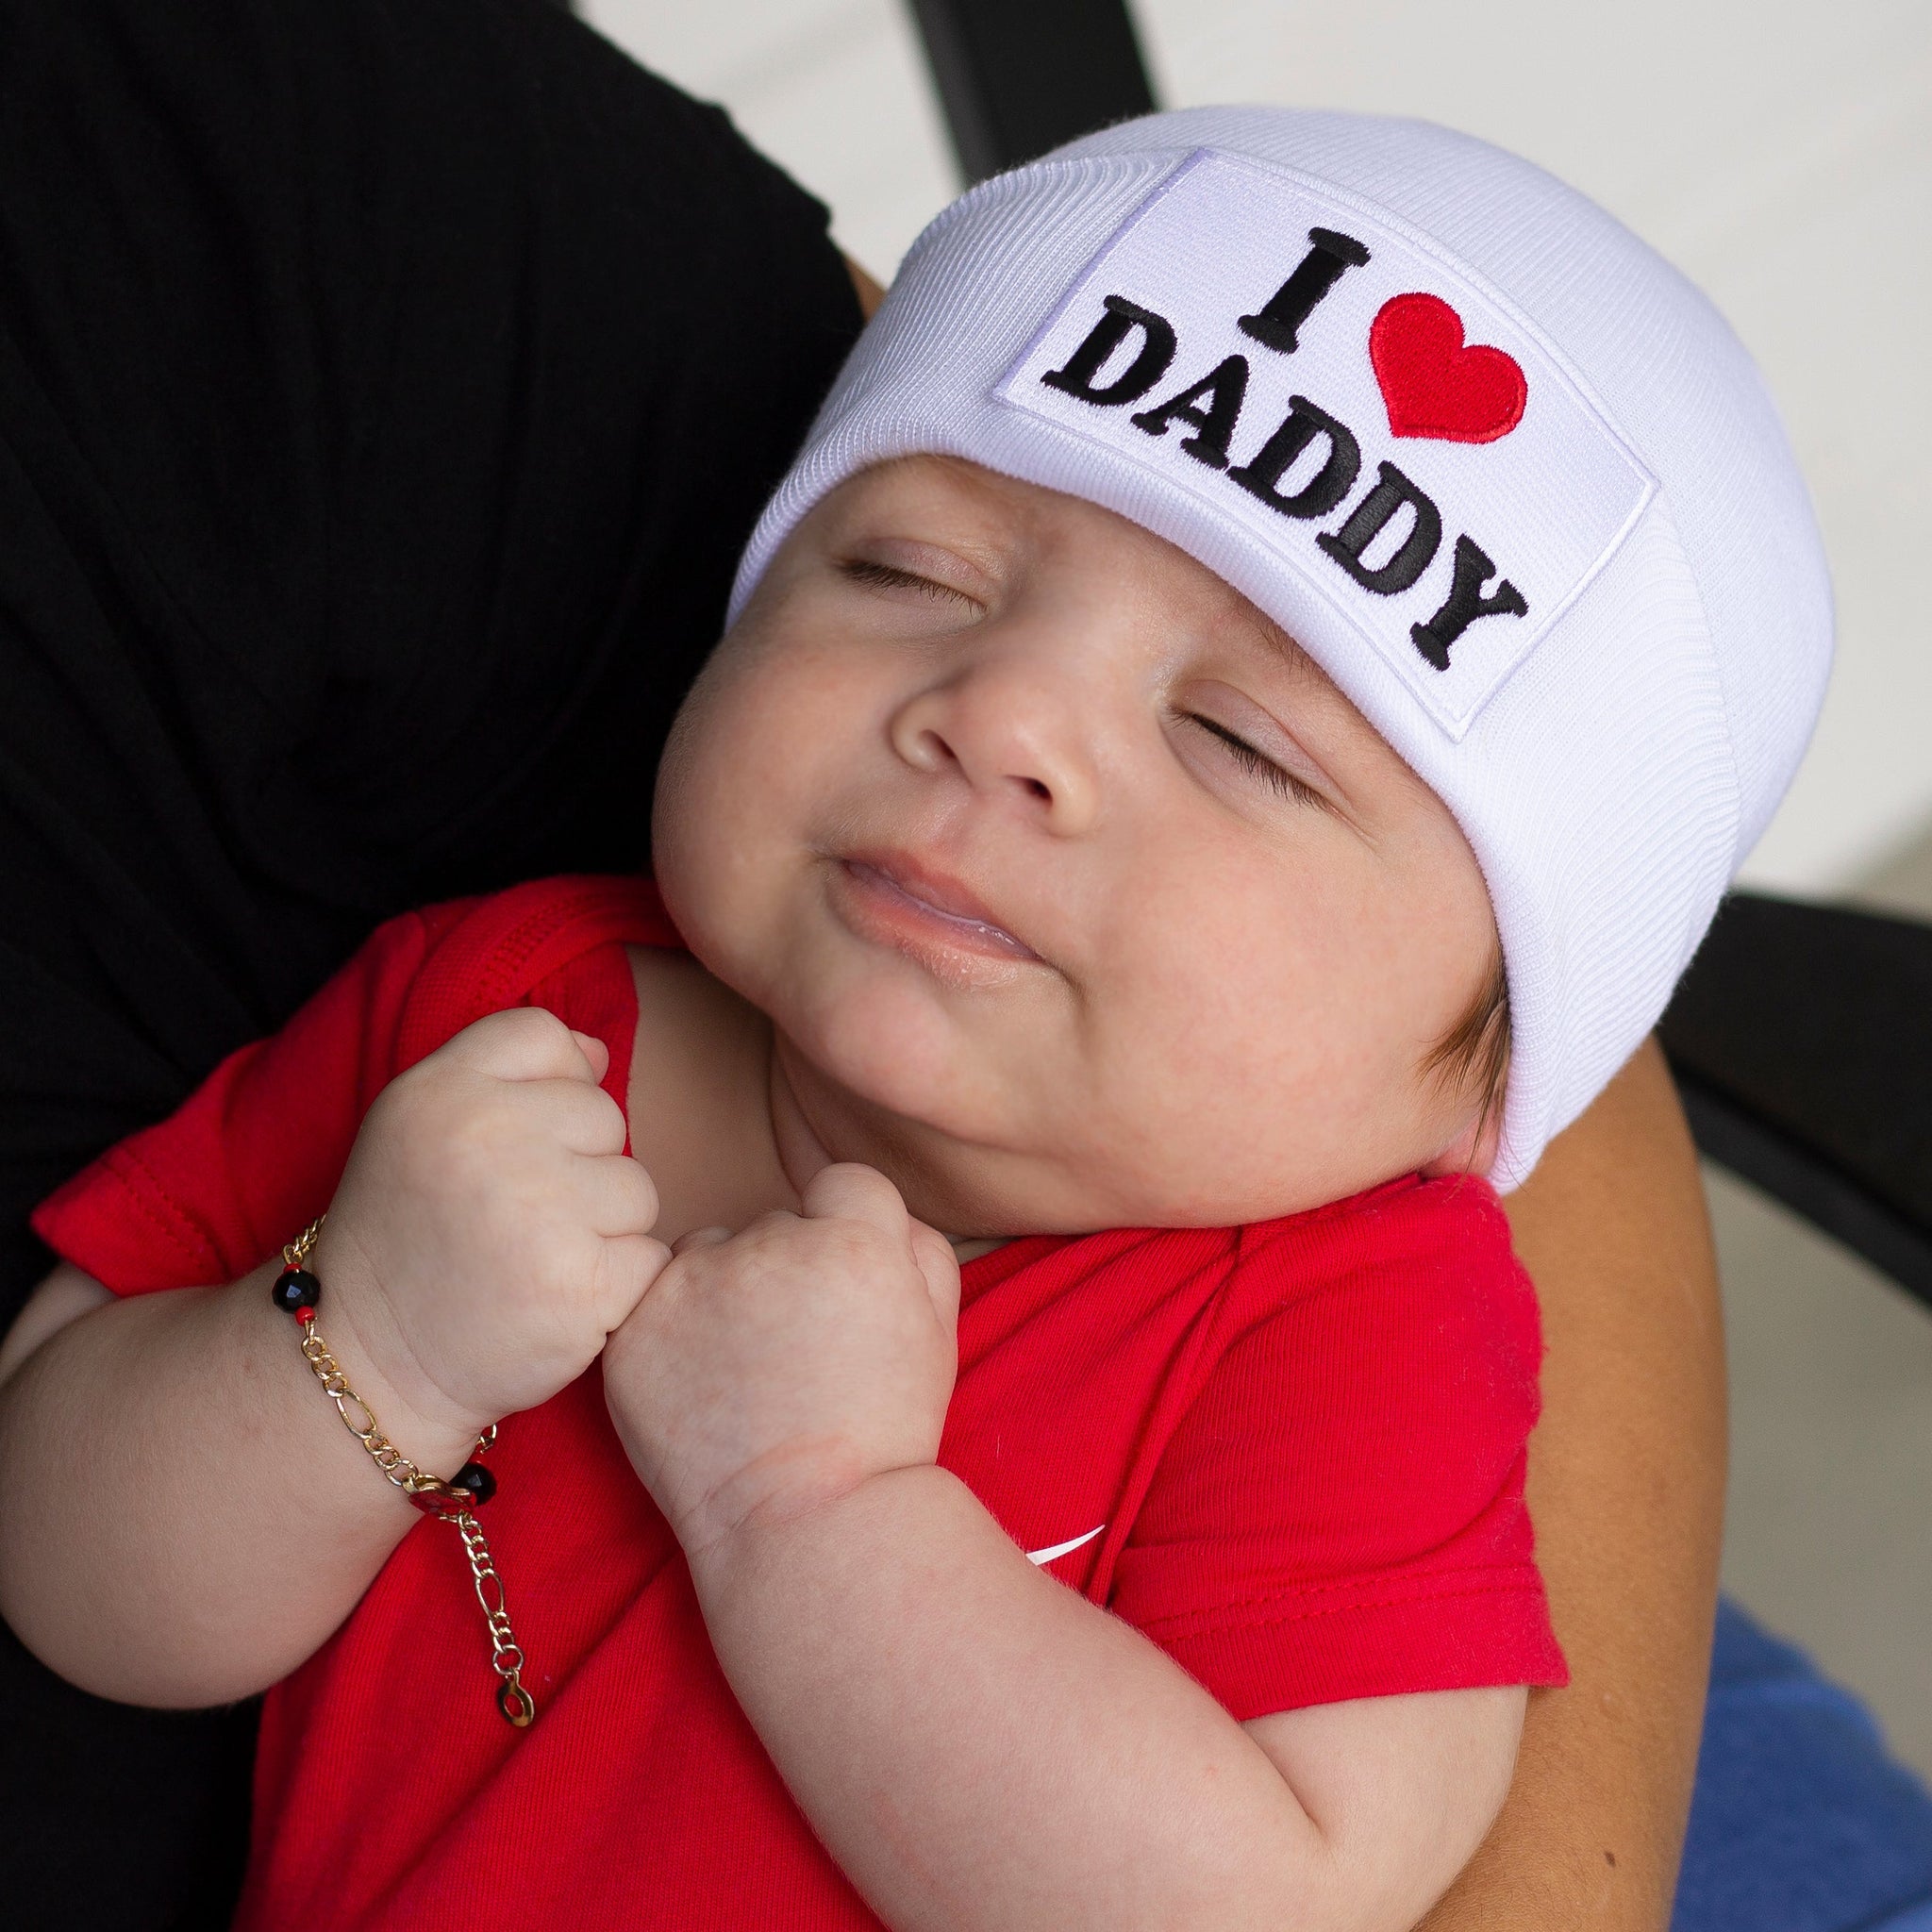 I HEART Daddy (or Mommy) newborn and baby hat for boys and girls - gender neutral baby hat